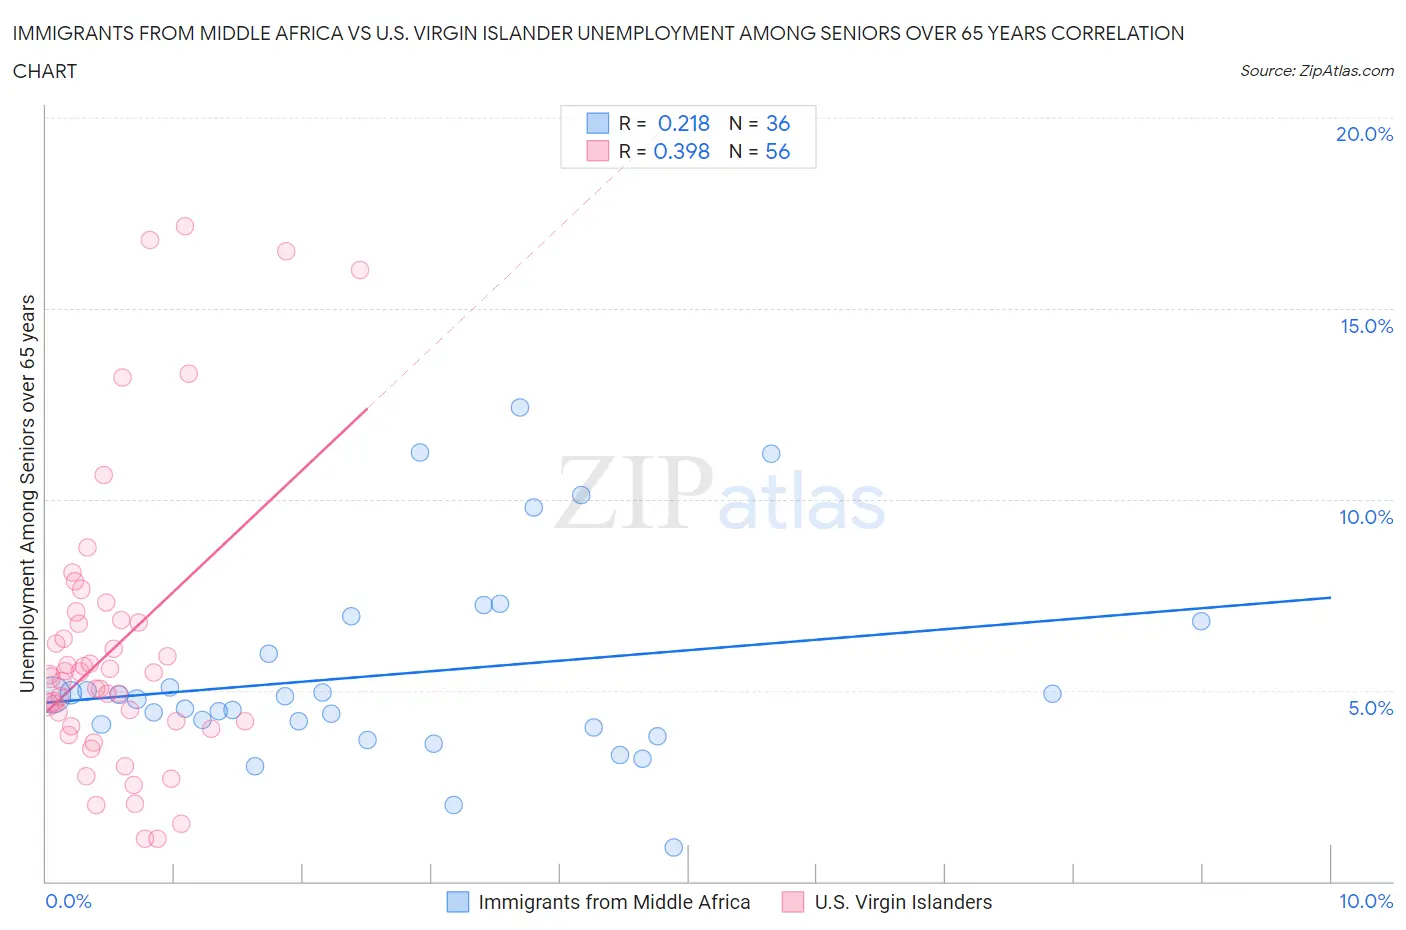 Immigrants from Middle Africa vs U.S. Virgin Islander Unemployment Among Seniors over 65 years